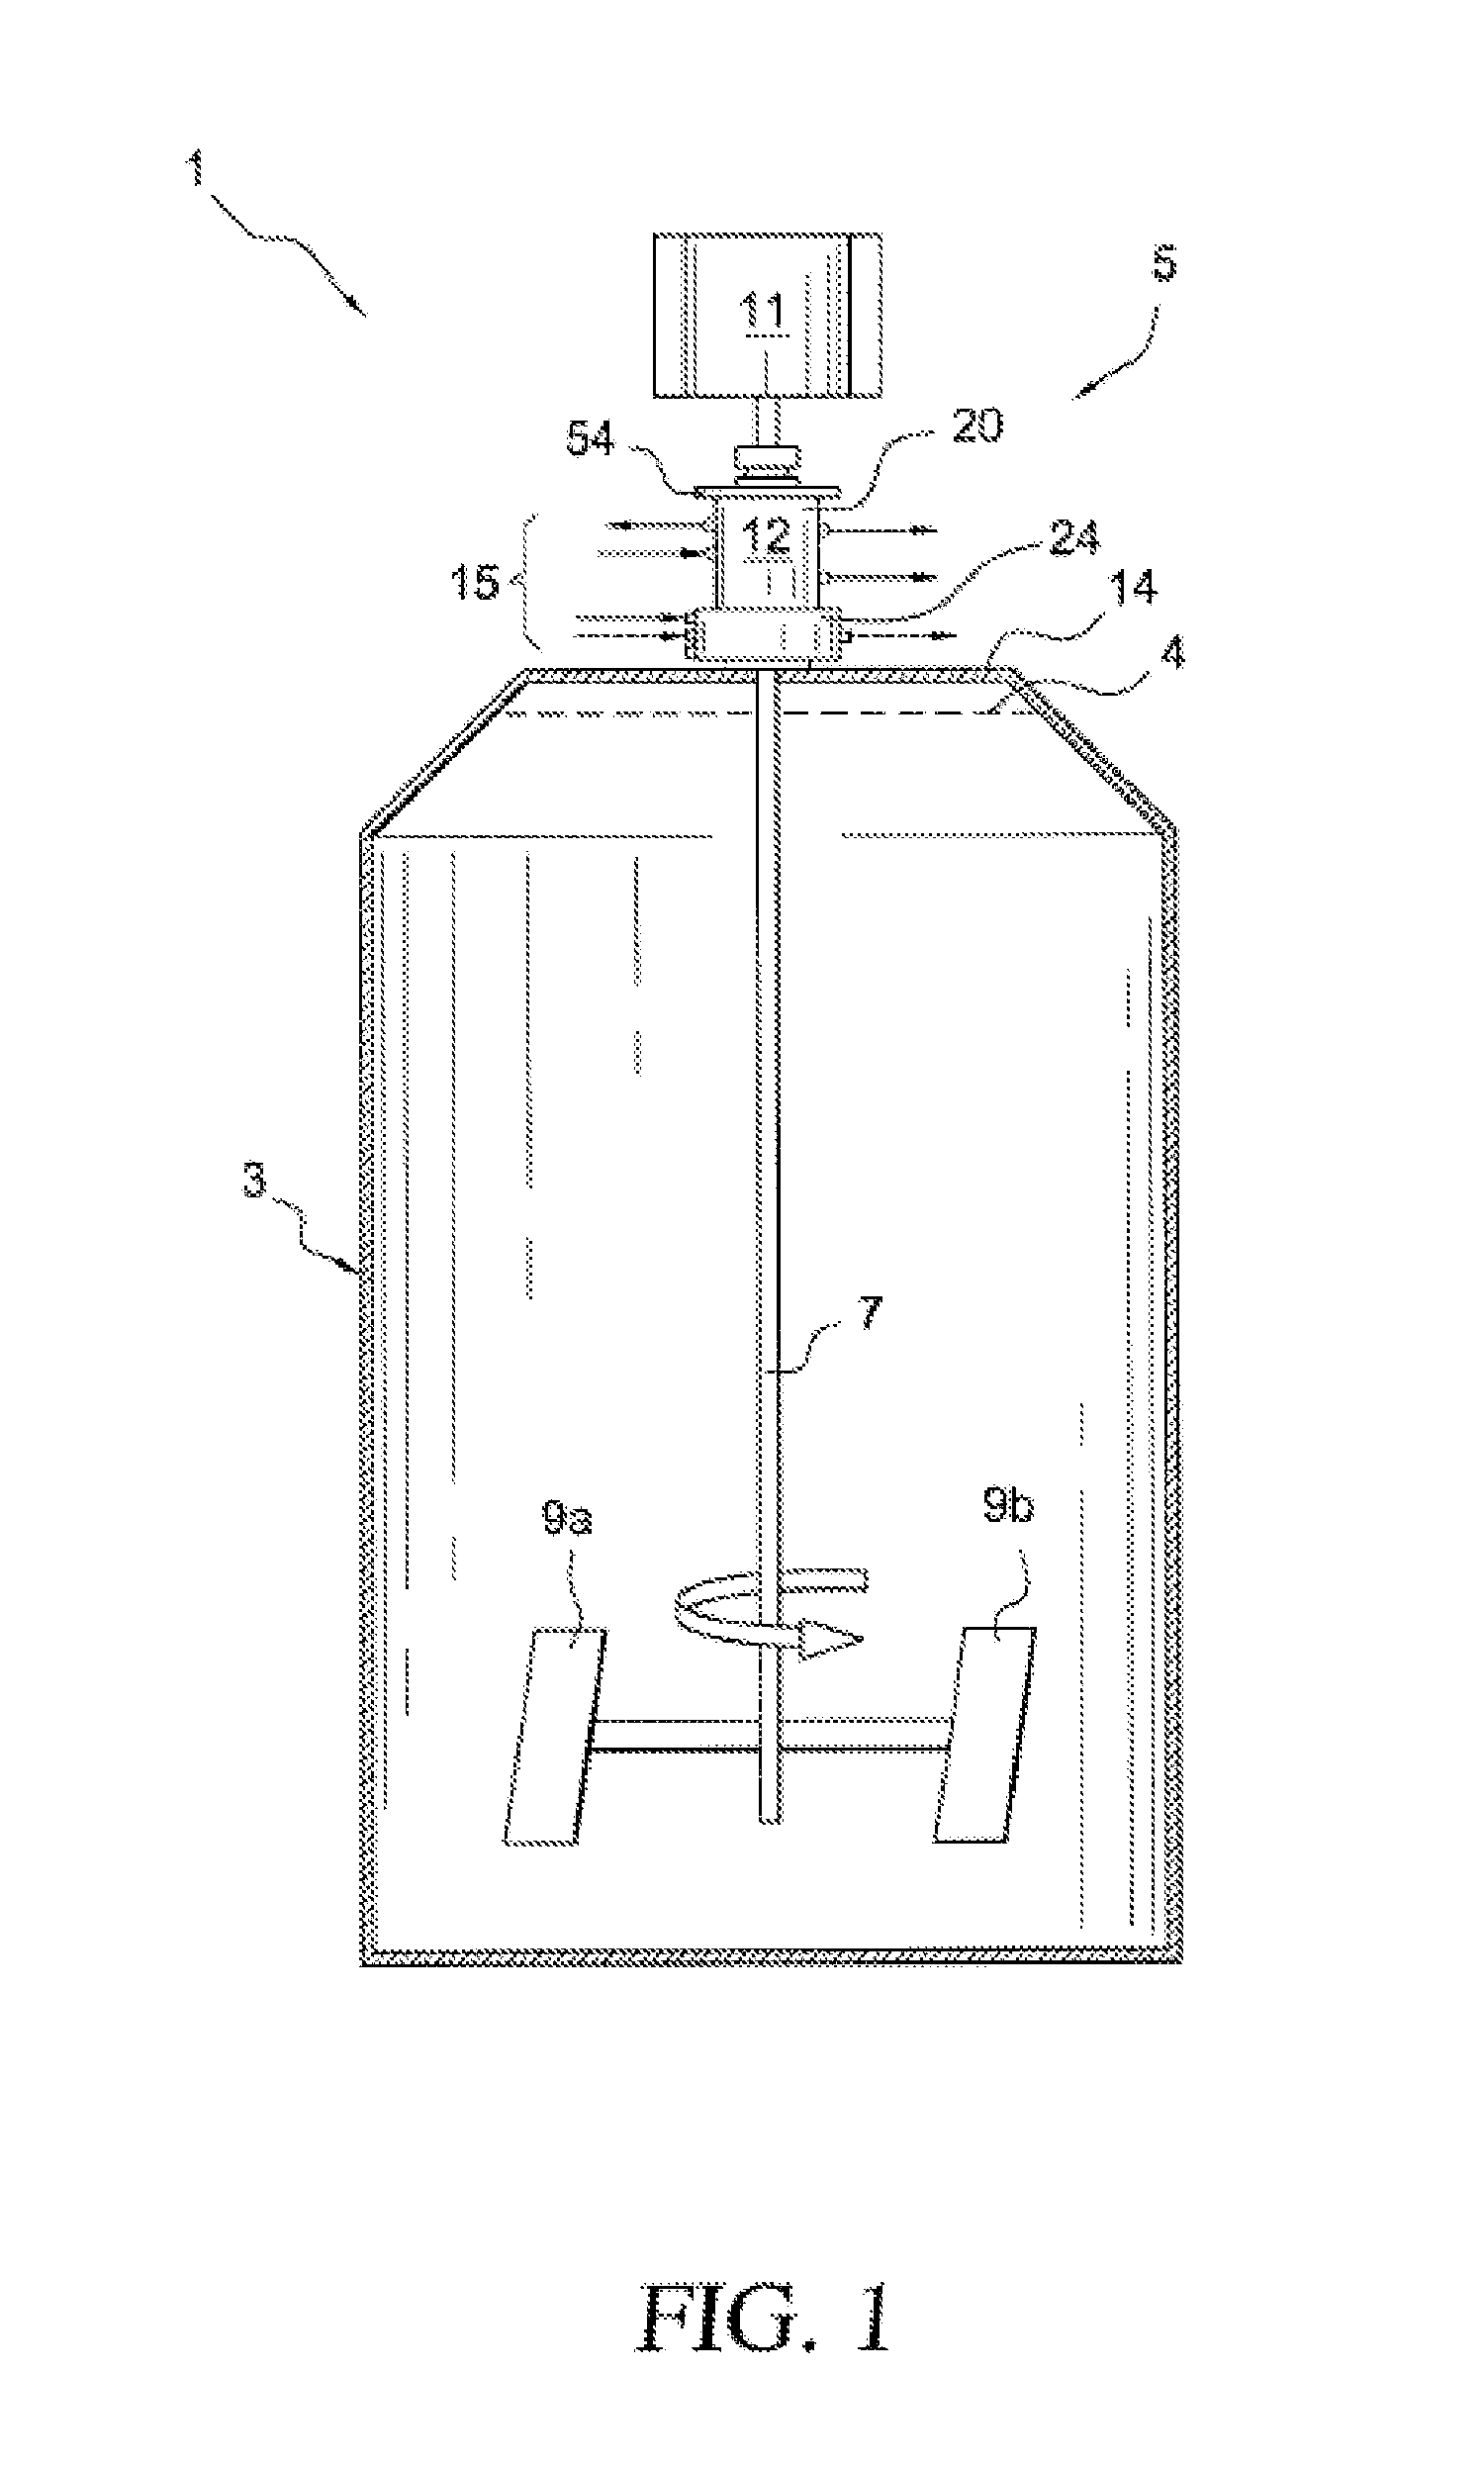 Polymerization reactor and related process